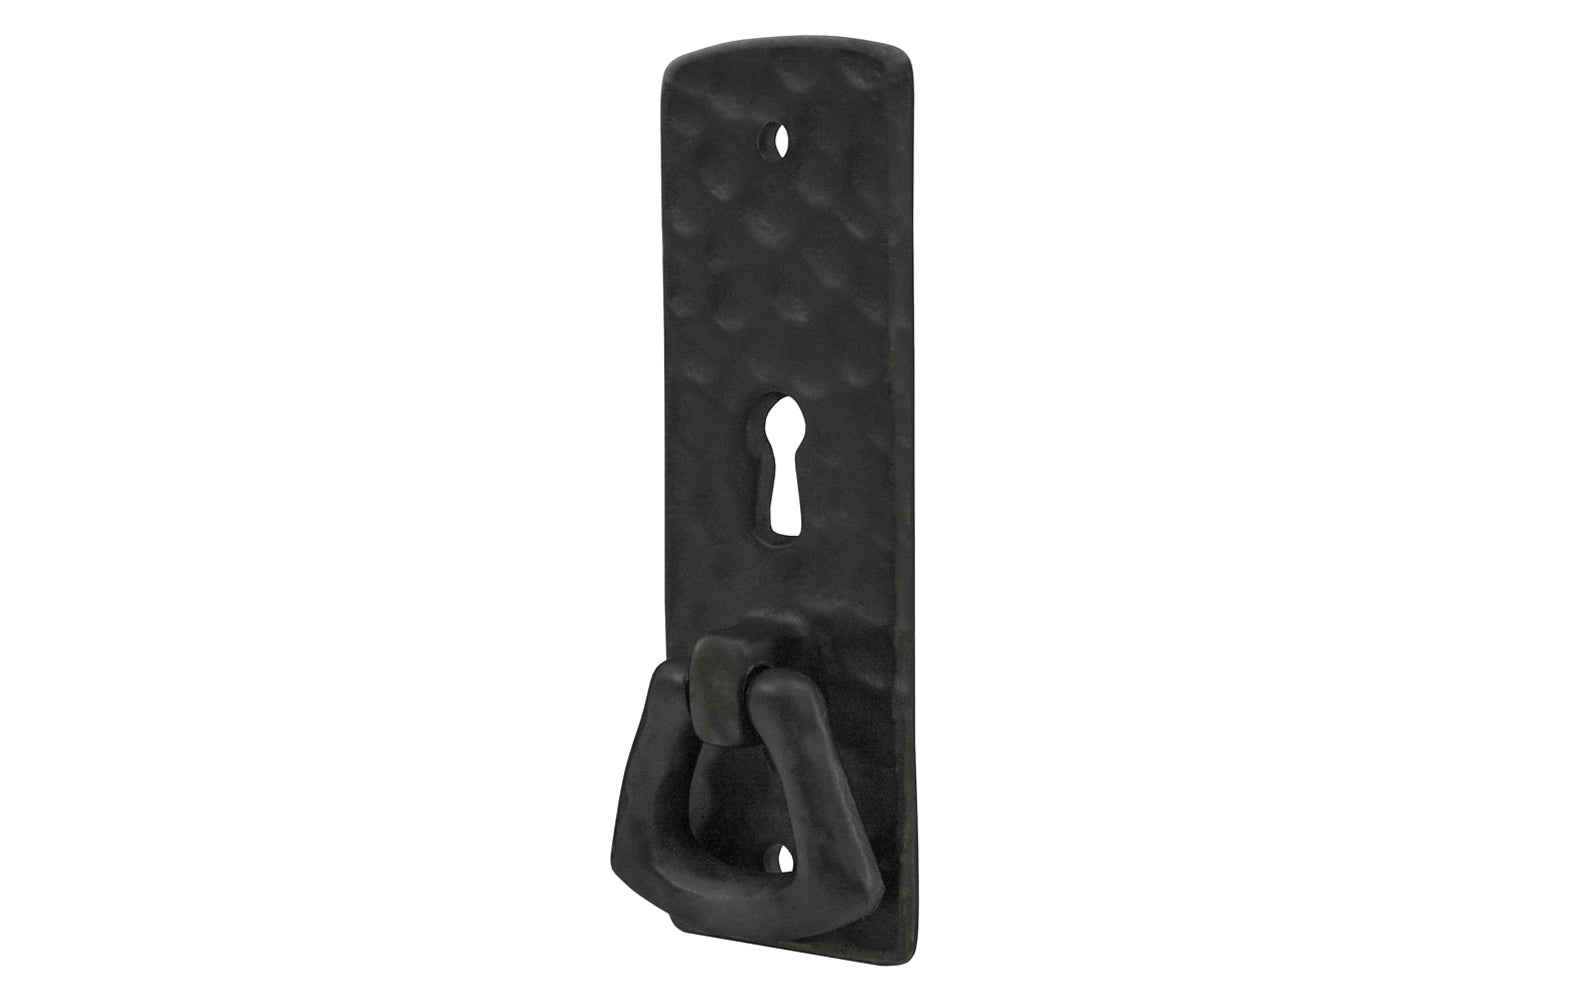 Vintage-style Hardware · Solid Brass Hammered Keyhole & Drop Pull. The finger pull has a hammered surface that gives a rustic & stylish look. Designed in the Mission or Arts & Crafts style, Gustav Stickley style hardware. Flat black finish.